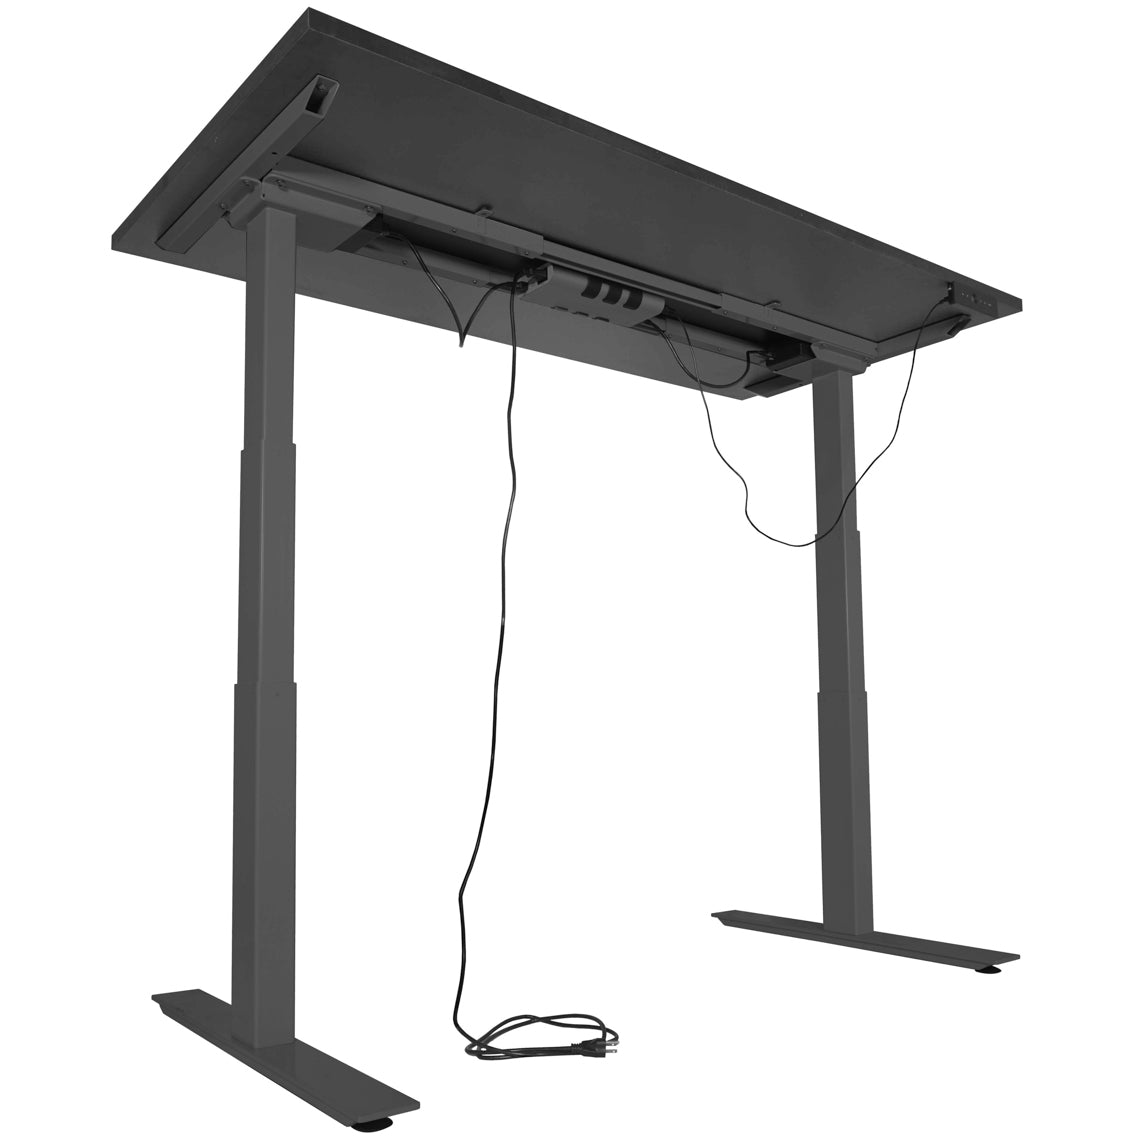 A6 Adjustable Sit To Stand Desk 24"- 50" W/ Black 60" X 30" Top - view 4